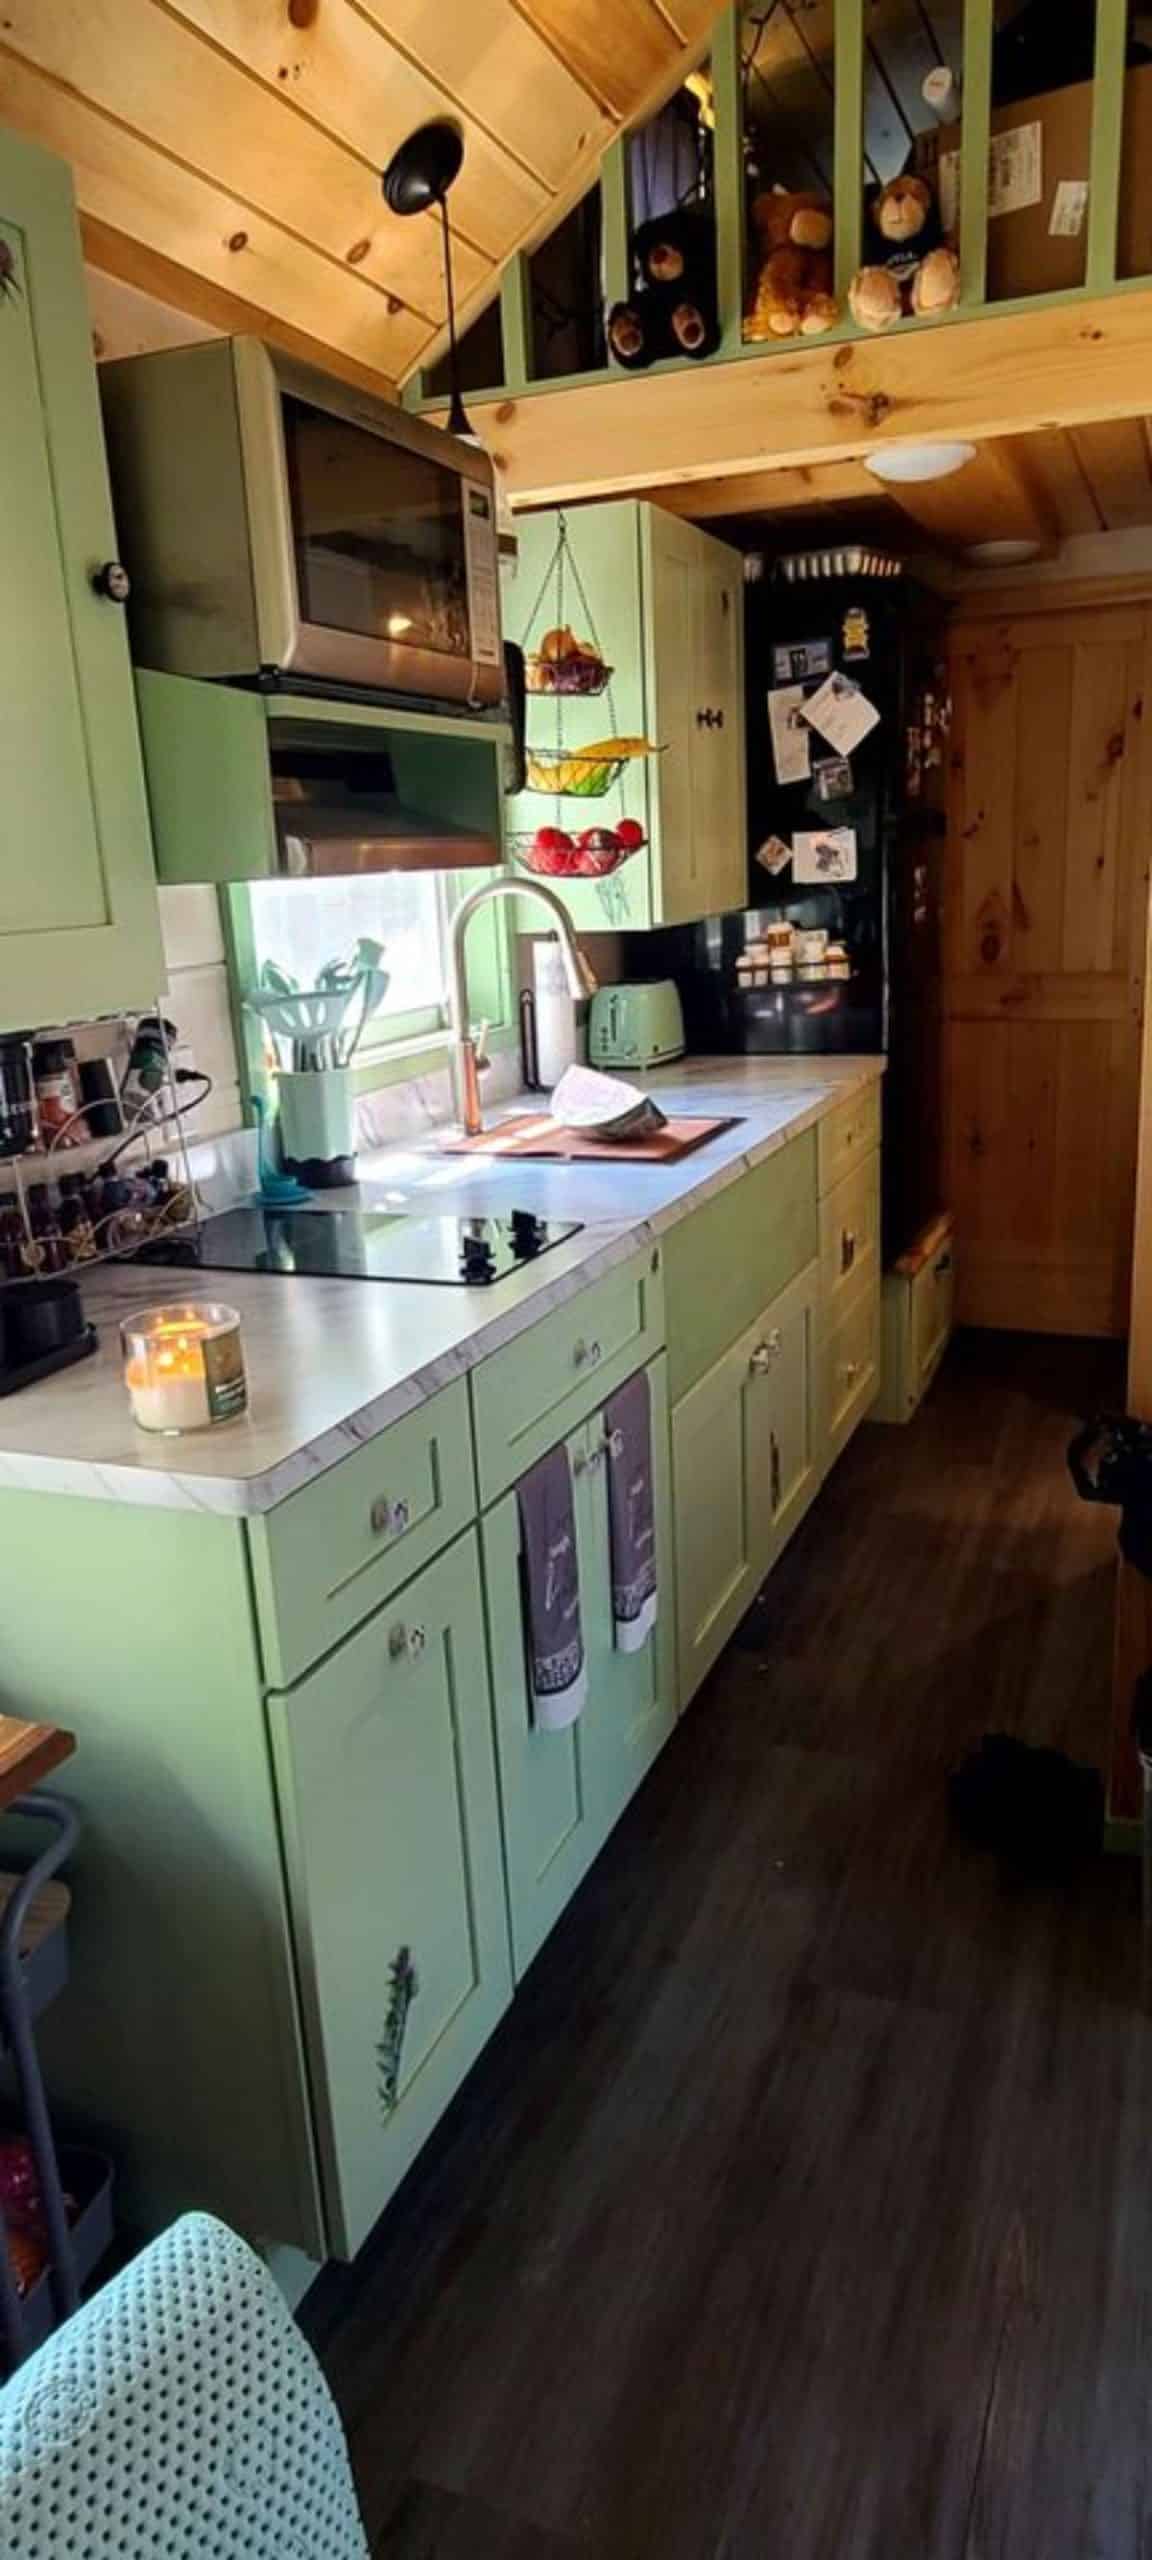 huge countertop with sink and all the appliances in the kitchen of mountain tiny home